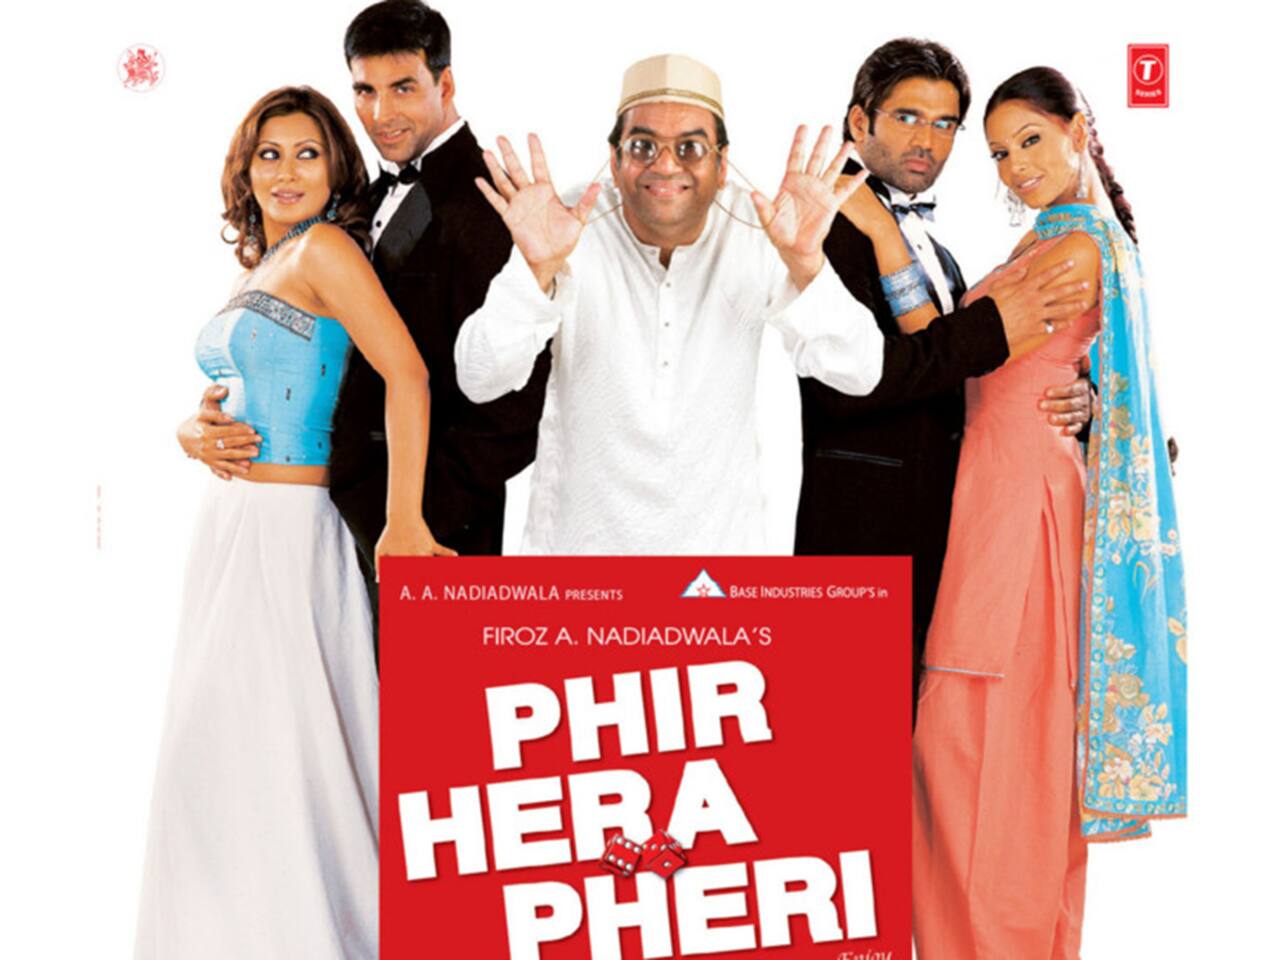 Phir Hera Pheri got us rolling with their comedy